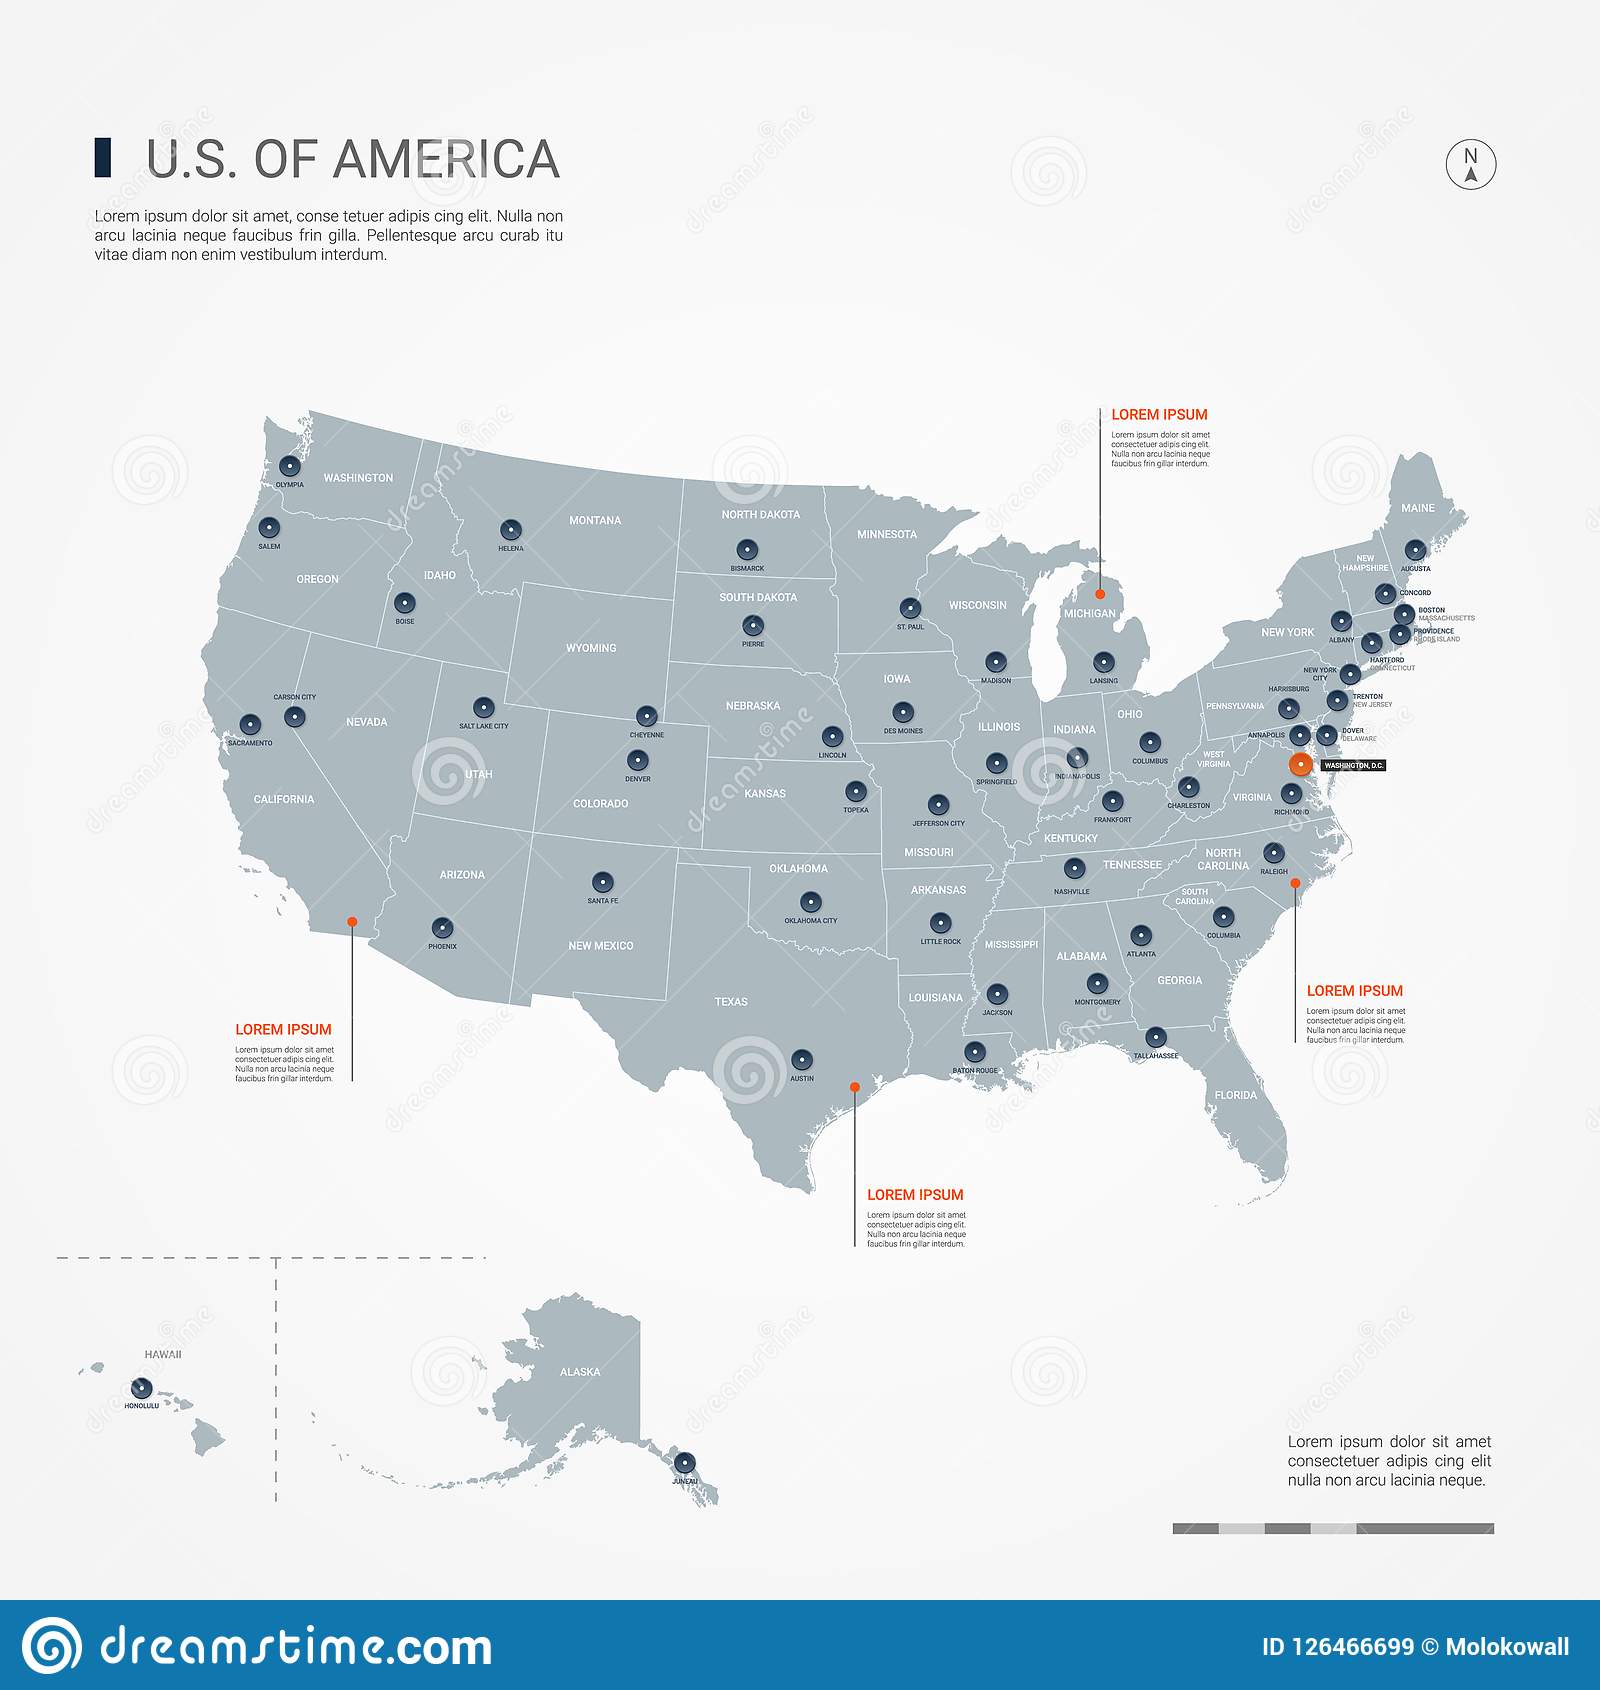 b"The United States of Energy [Infographic] - Americas Energy, Biamass, Clean Energy, coal ..."